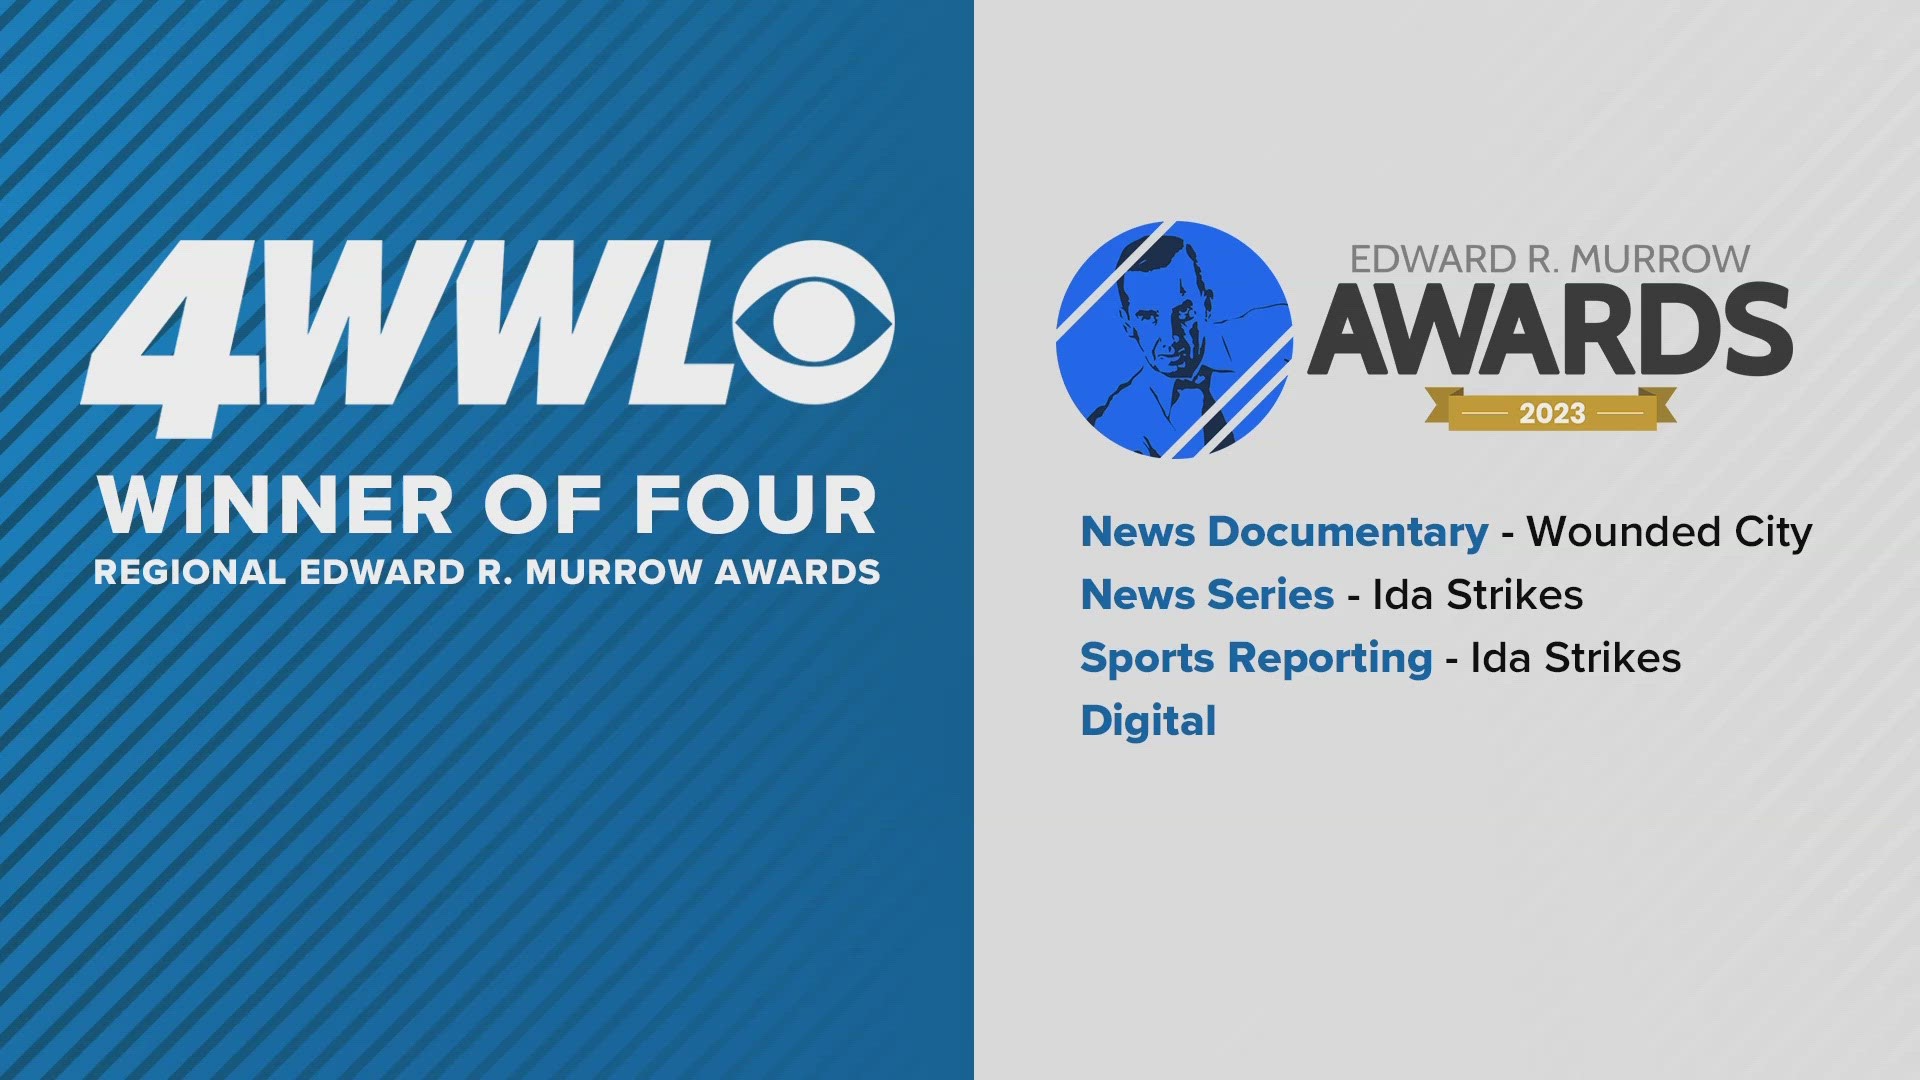 WWL-TV wins 4 Regional Edward R. Murrow awards for documentary, news series, sports story and online news coverage.